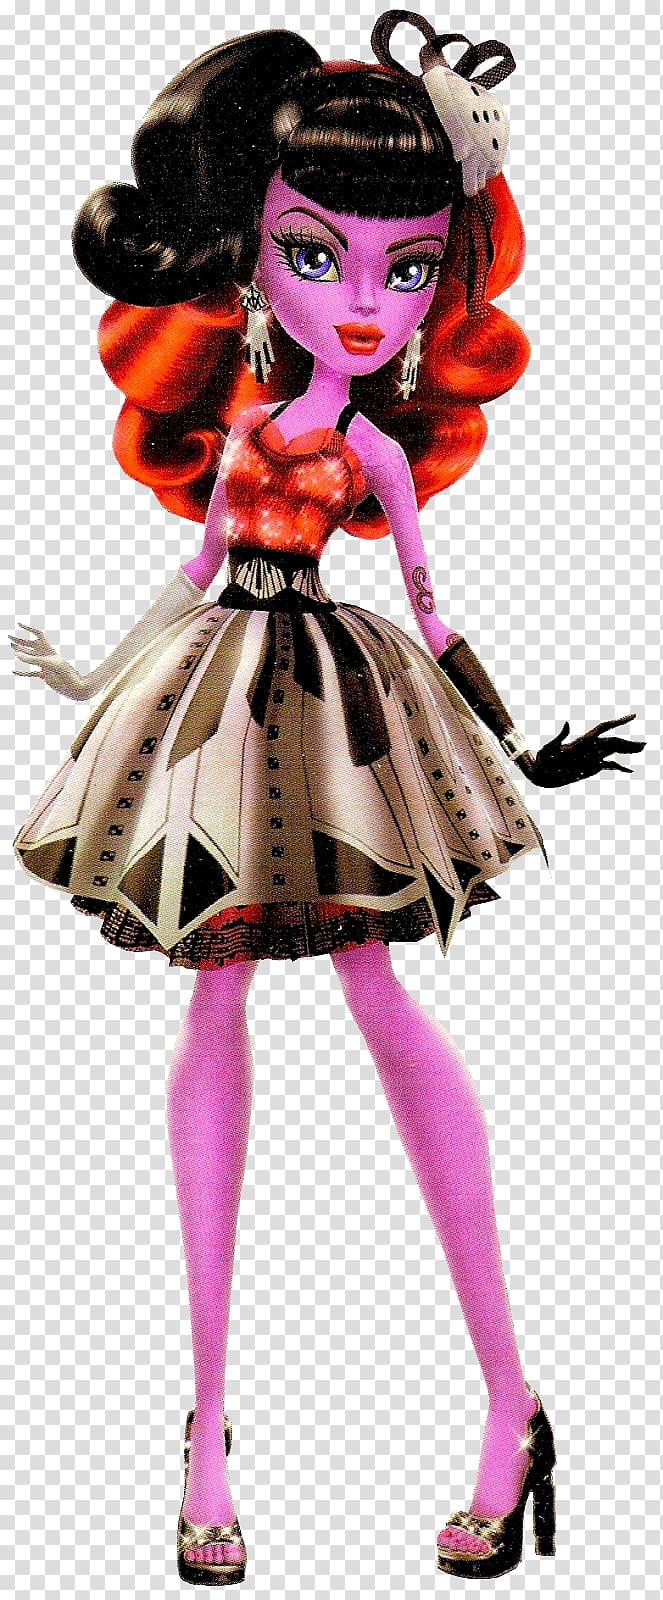 Monster High: Frights, Camera, Action! Barbie Draculaura Clawdeen Wolf, barbie transparent background PNG clipart